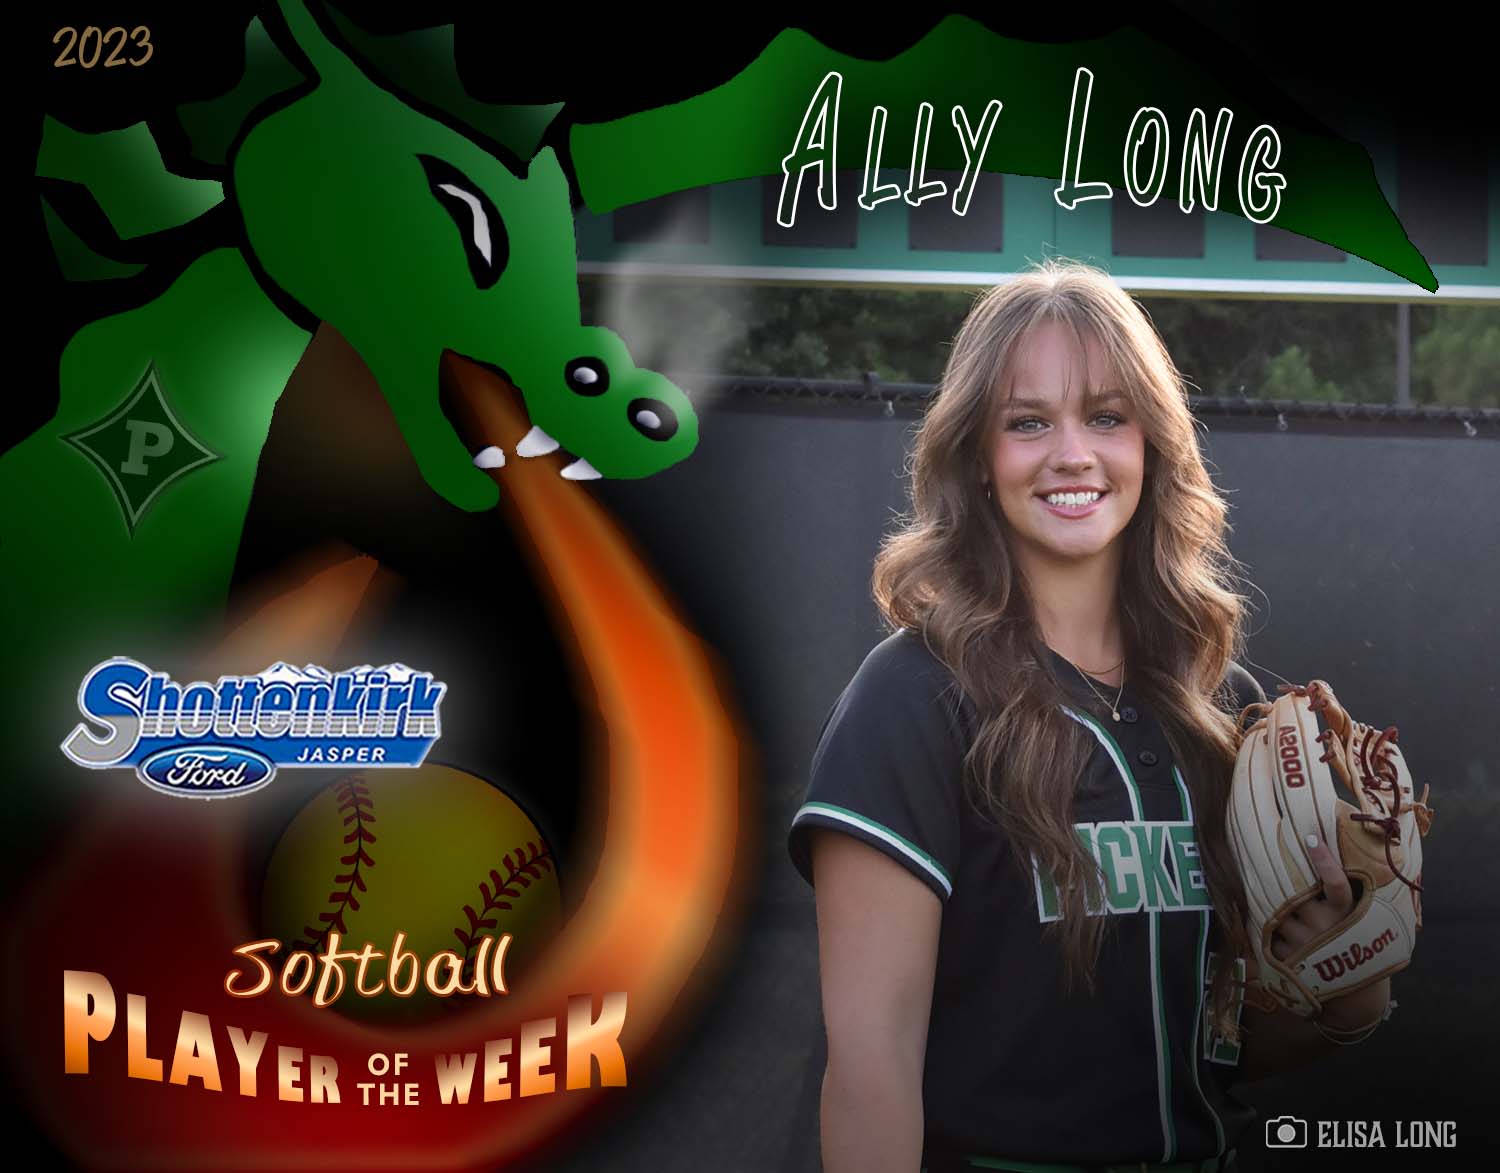 PHS Softball Player of the Week #4 - Ally Long